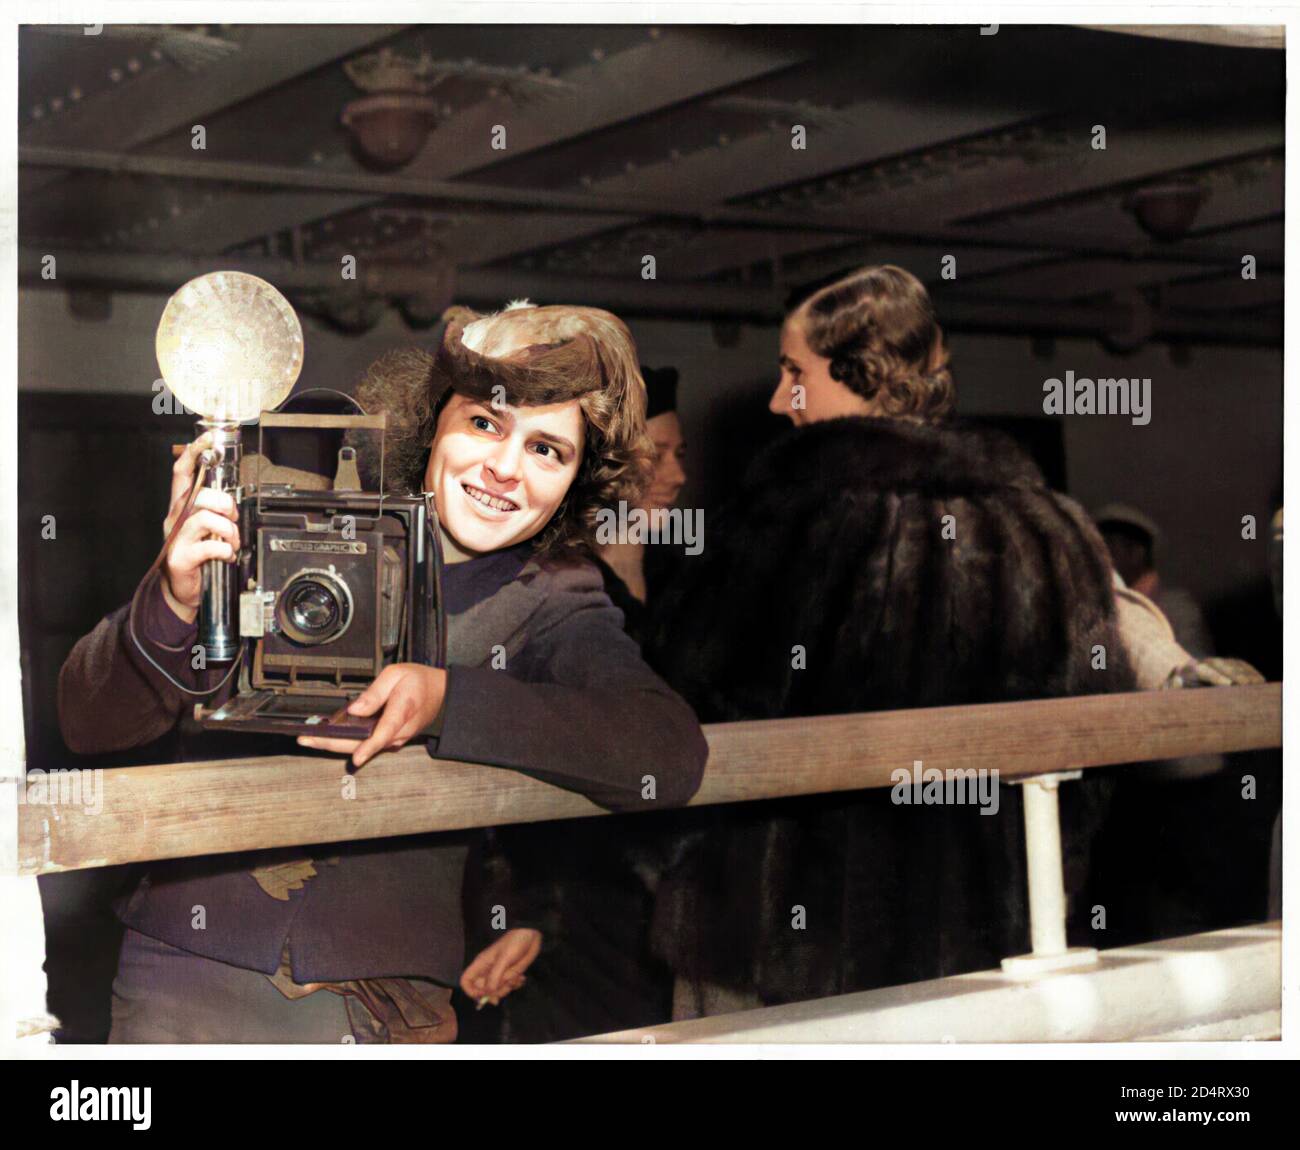 1939 , NEW YORK , USA : The celebrated American woman reporter photographer  MARGARET BOURKE-WHITE ( 1904 - 1971 ) at work in NY harbor on a boat on route to WAR in EUROPE . Portrait by unknown photographer . At time Margaret married the celebrated novelist Erskine Caldwell . Bourke-White was the first known female War correspondent and the first woman to be allowed to work in combat zones during the World War II. In 1941 she traveled to the Soviet Union and from 1942 was attached to the U.S. Army Air Force in North Africa , then to the U.S. Army in Italy and later in Germany .- DIGITALLY COLO Stock Photo